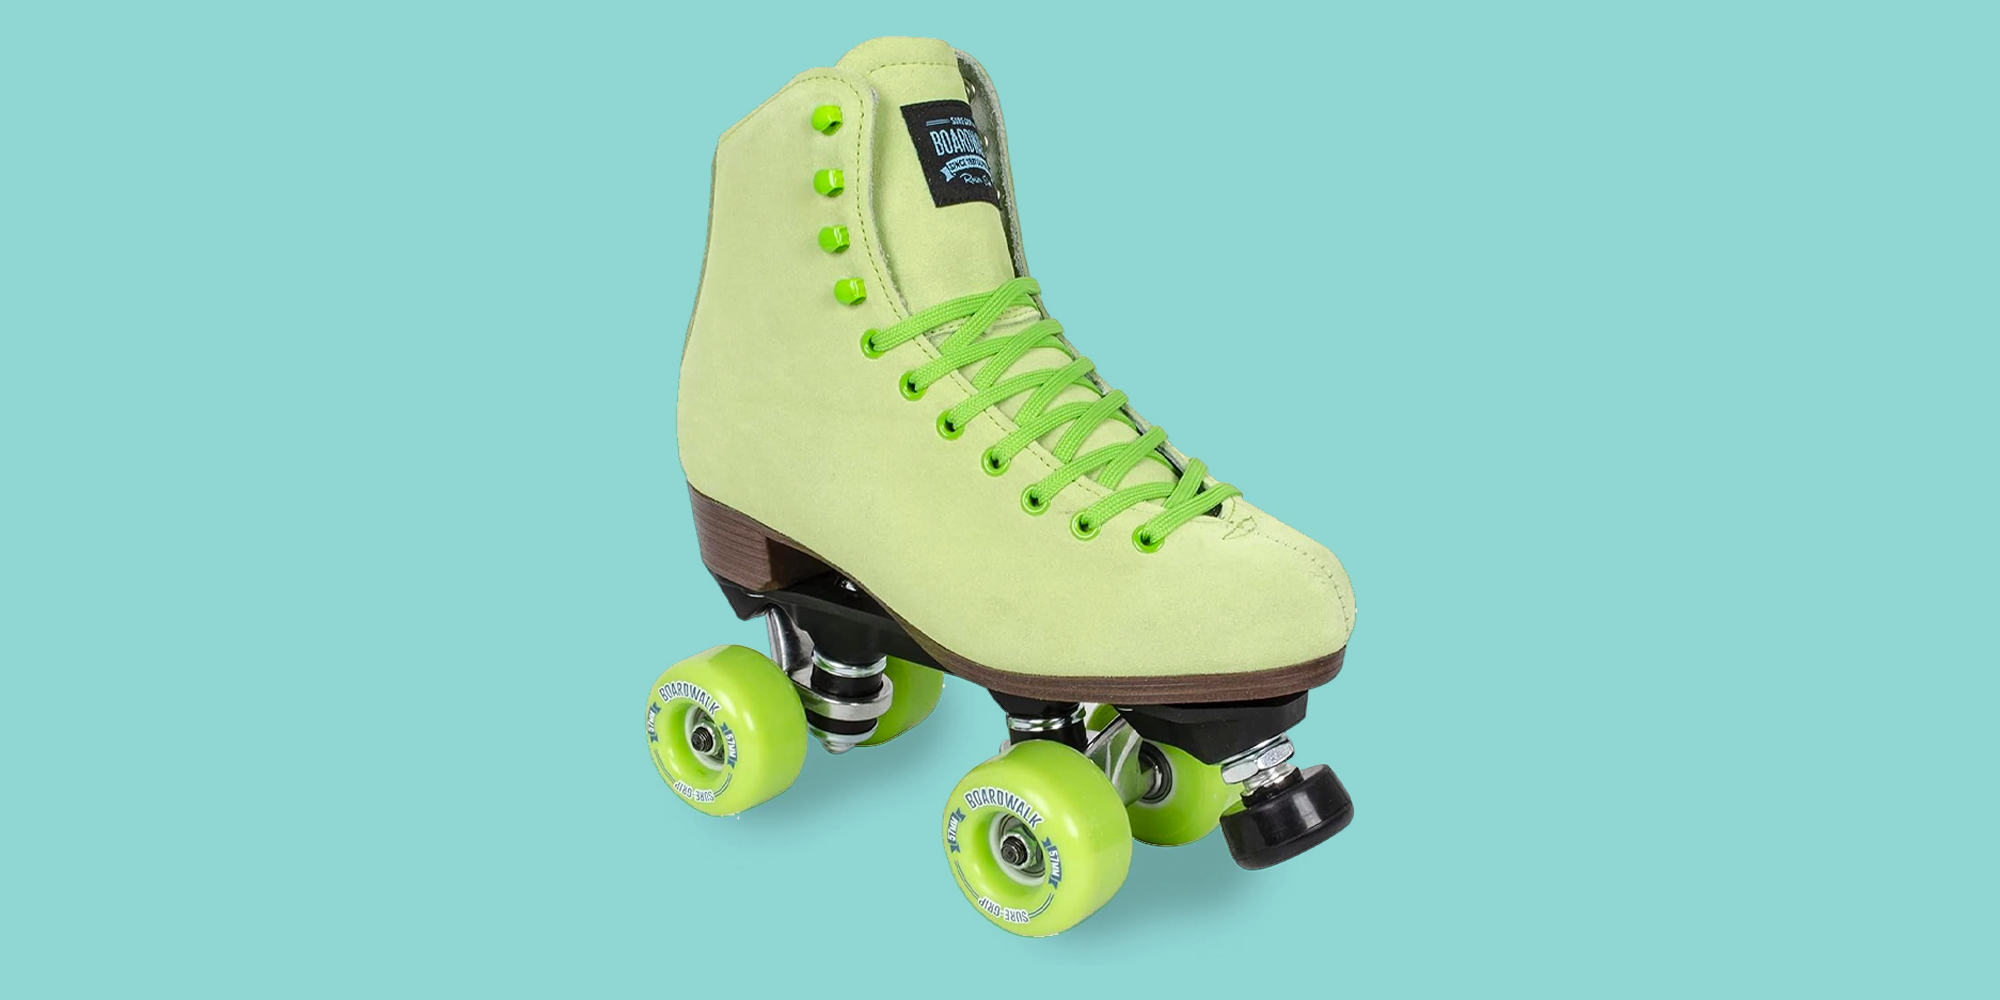 Why Is Roller Skating Difficult? It Doesn't Have To Be!